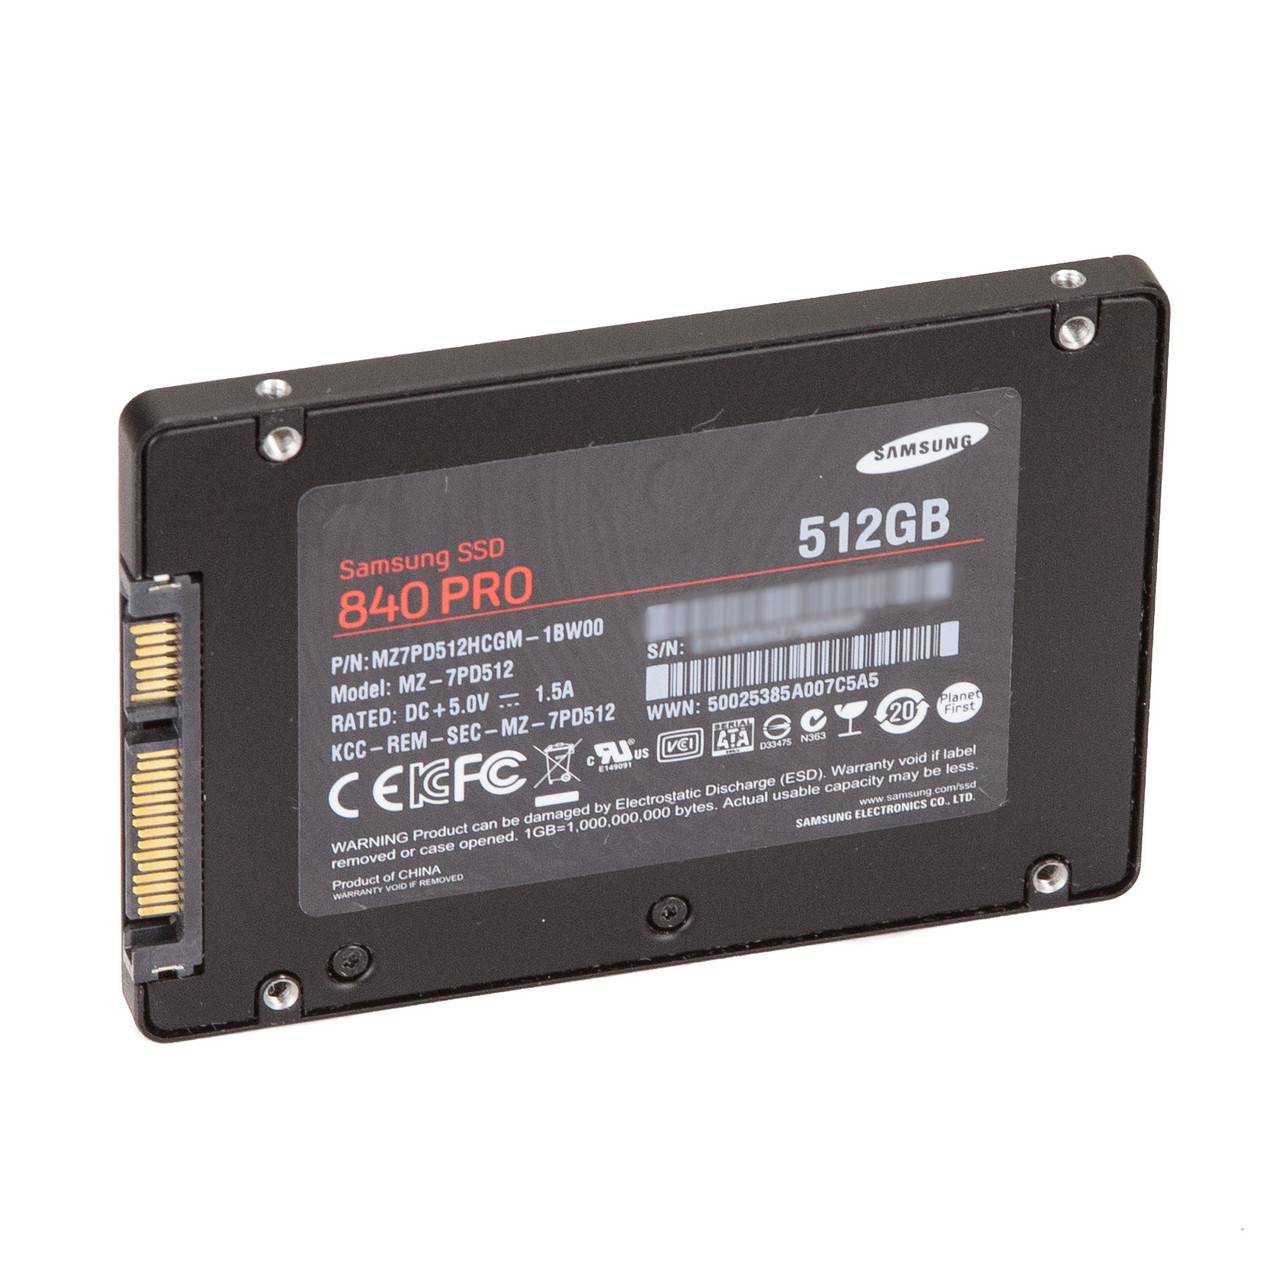 prins distrikt fort Samsung 840 Pro 512GB 2.5-Inch SATA 6Gbps Solid State Drive (MZ-7PD512) -  Central Valley Computer Parts